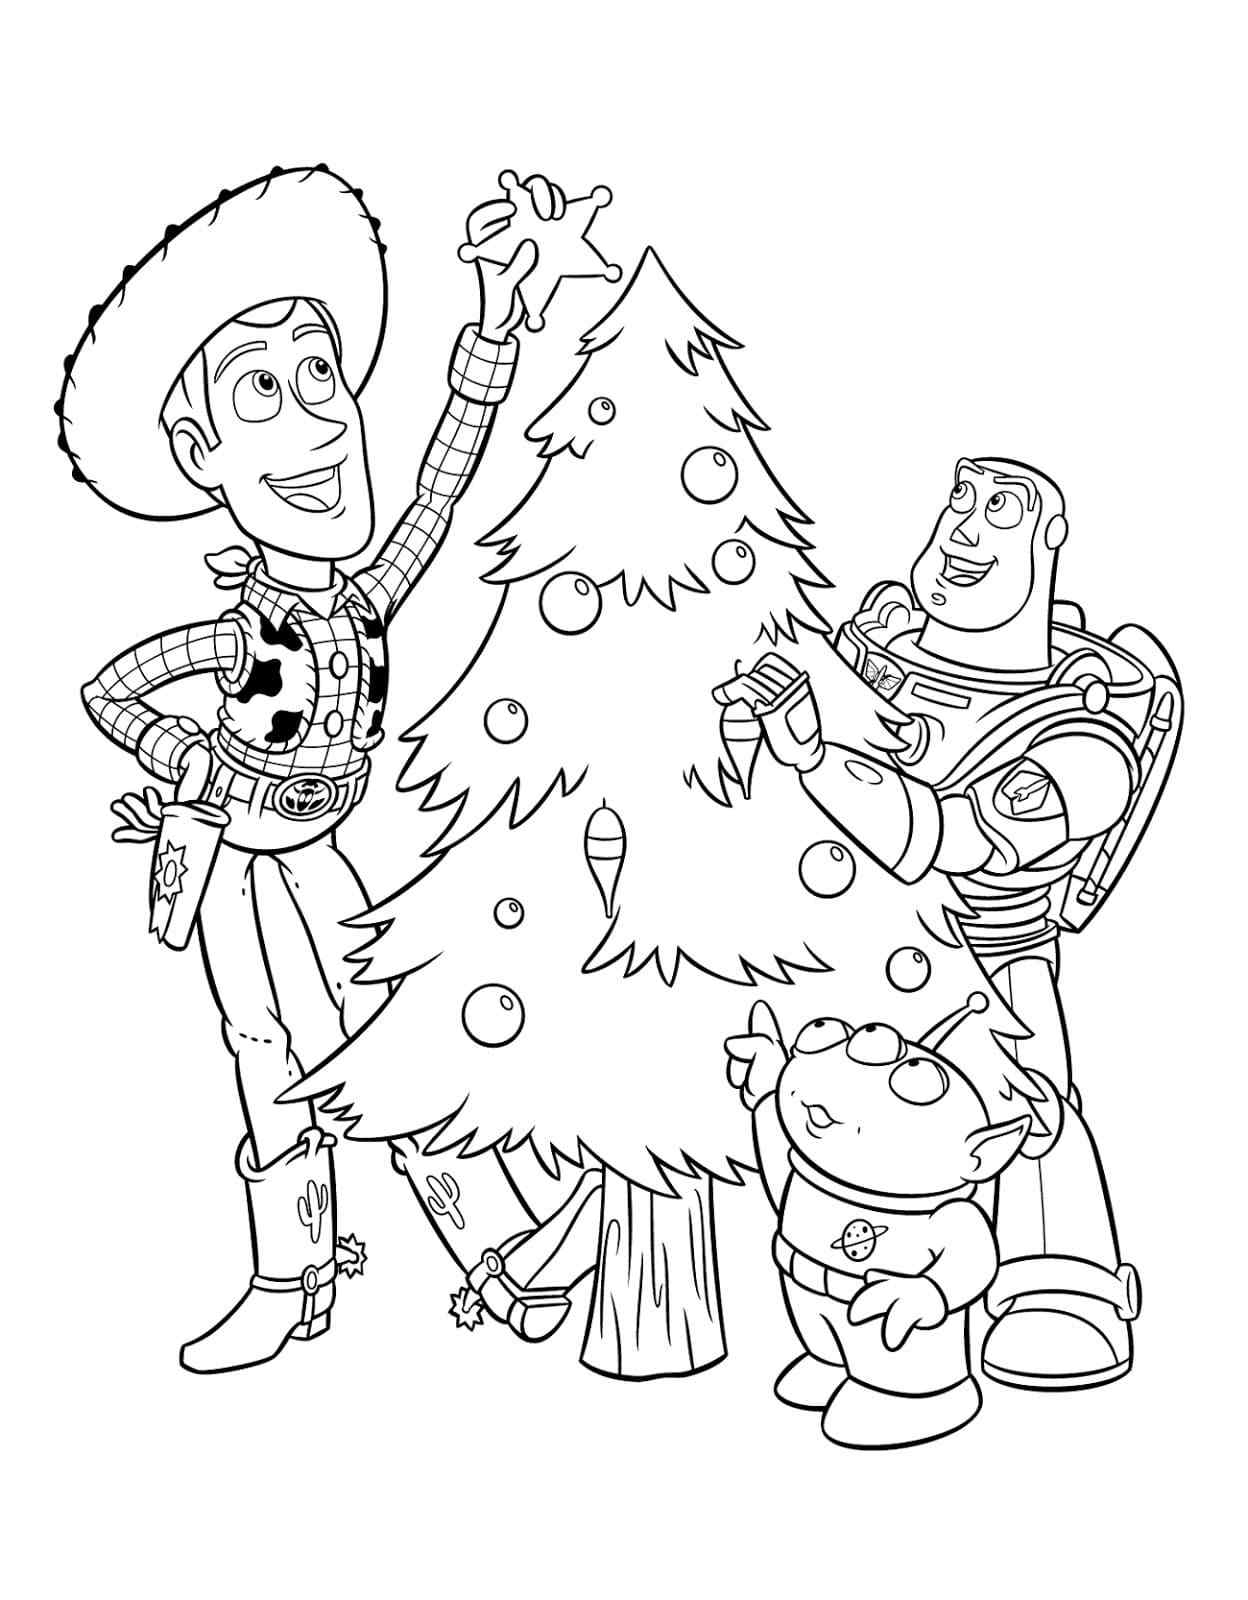 In decorating The Christmas Tree Coloring Page